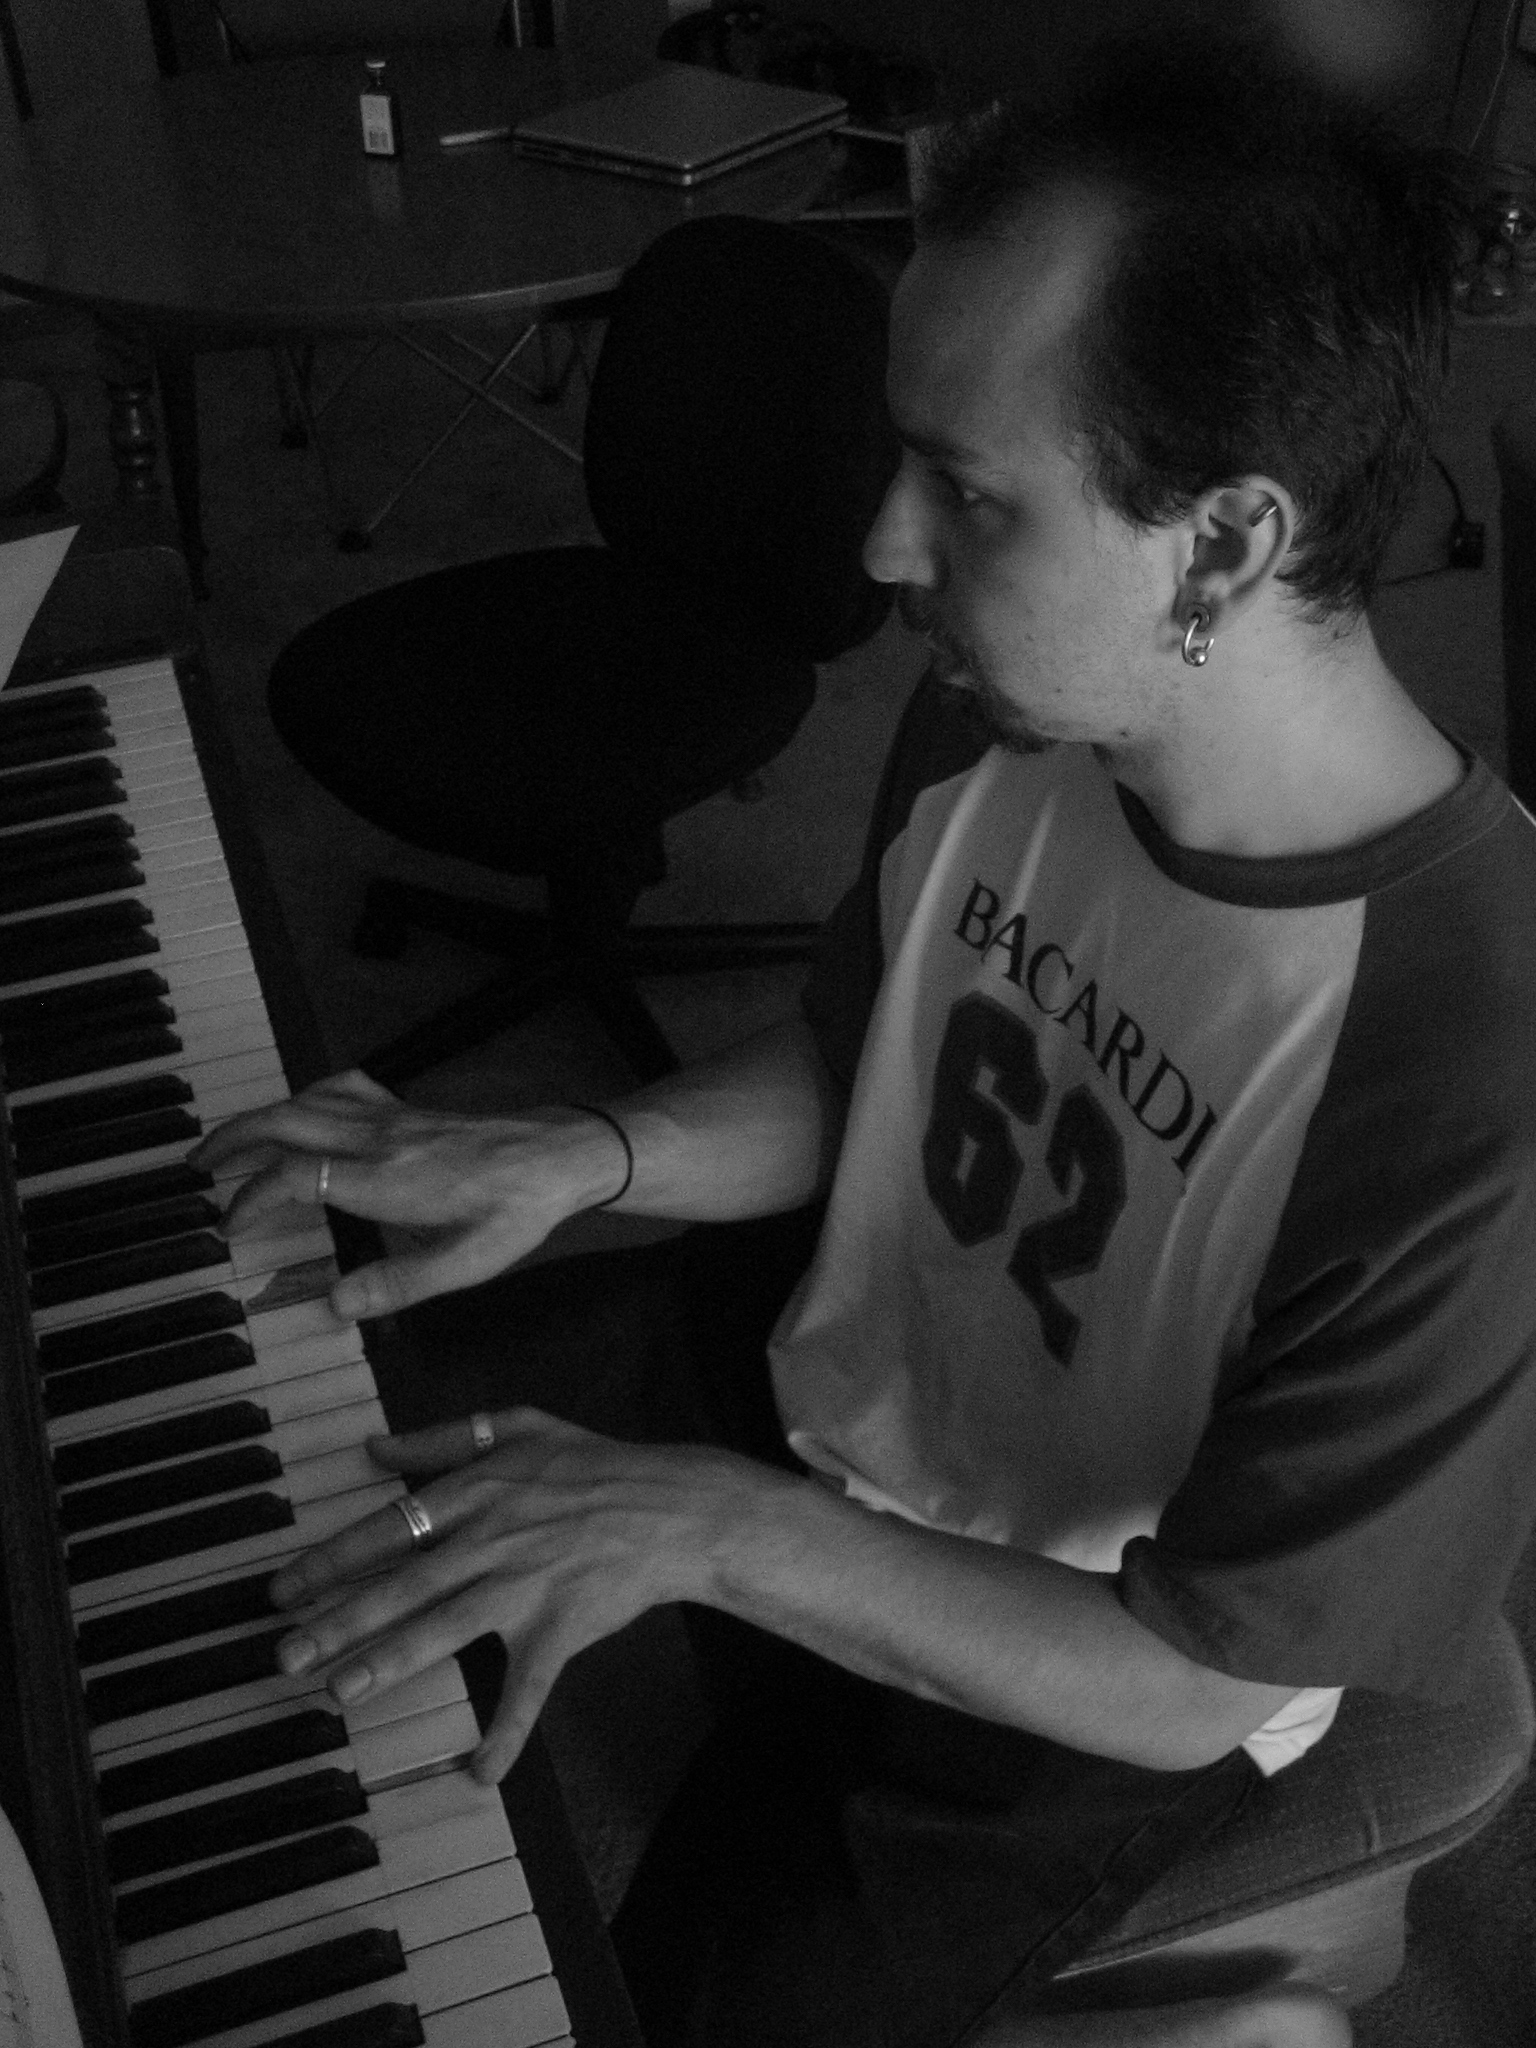 man with ear piercings sitting at a piano keyboard